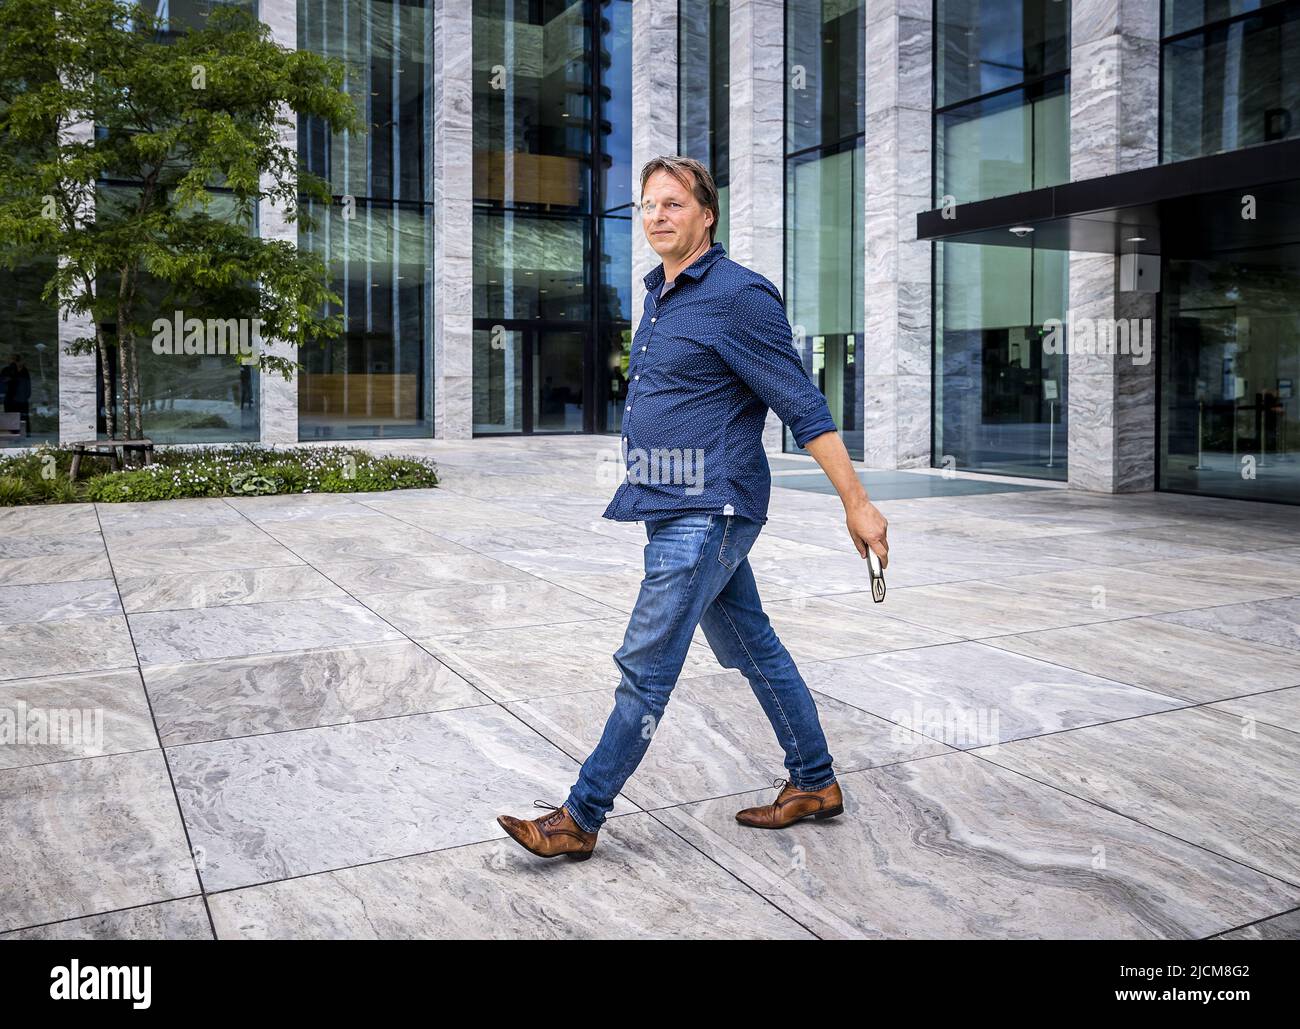 2022-06-14 13:25:36 AMSTERDAM - Camille van Gestel, a business partner of  Sywert van Lienden, leaves the court of Amsterdam during a suspension where  it is decided whether van Lienden, and other involved